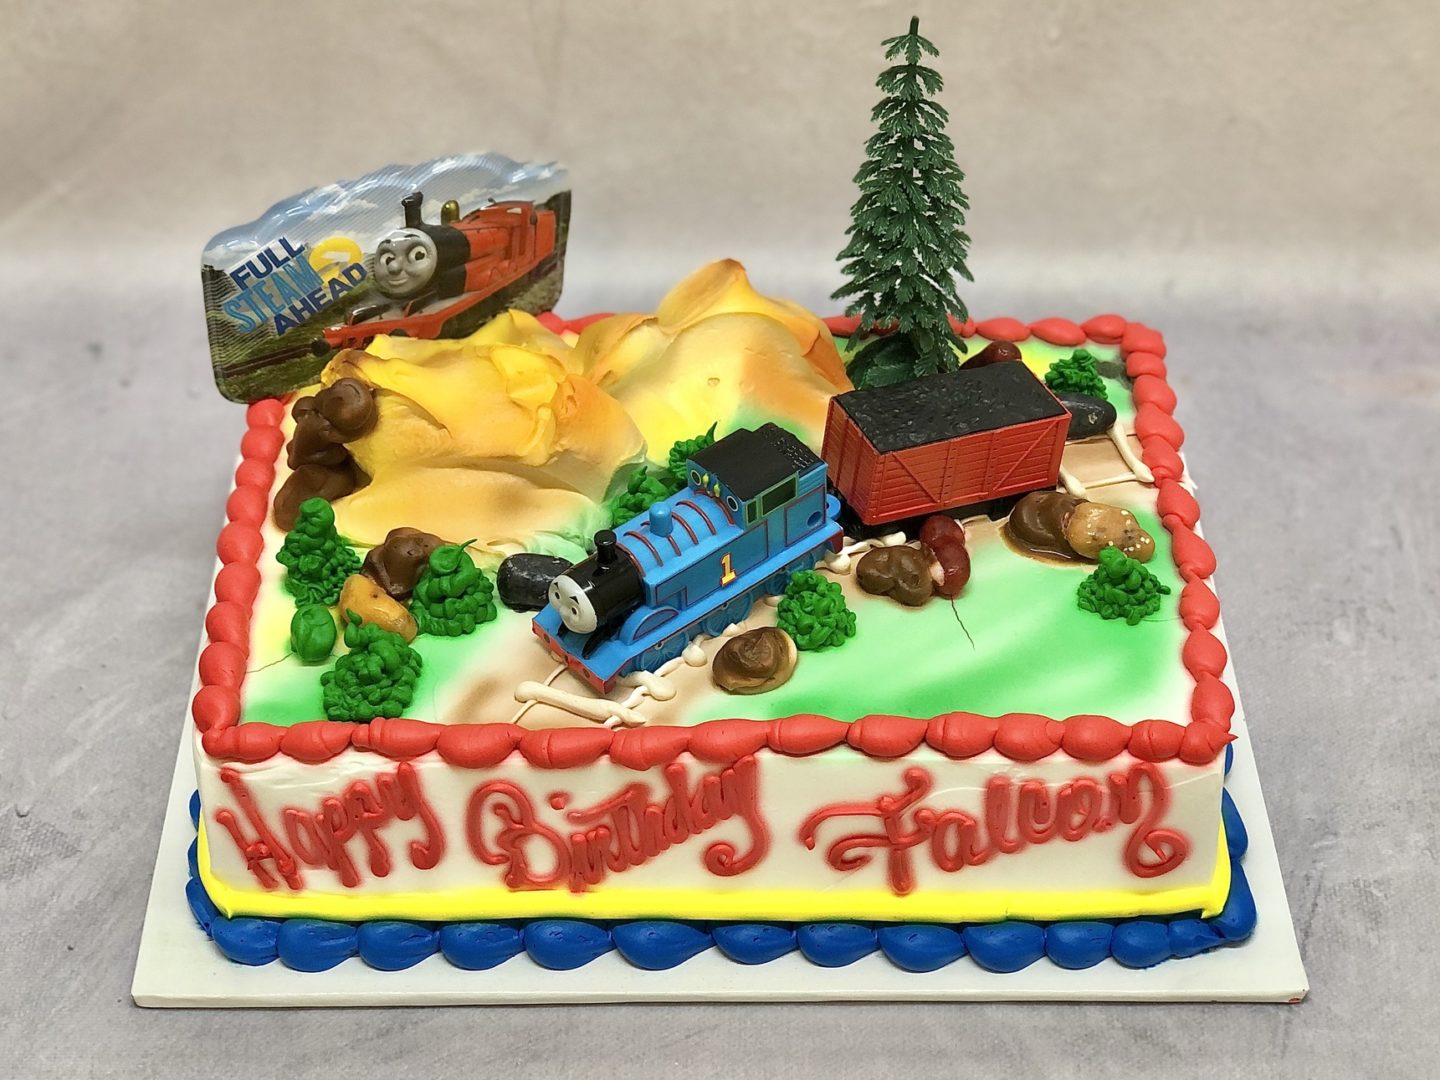 Buttercream Frosted Round Cake - Thomas the Train – Tiffany's Bakery